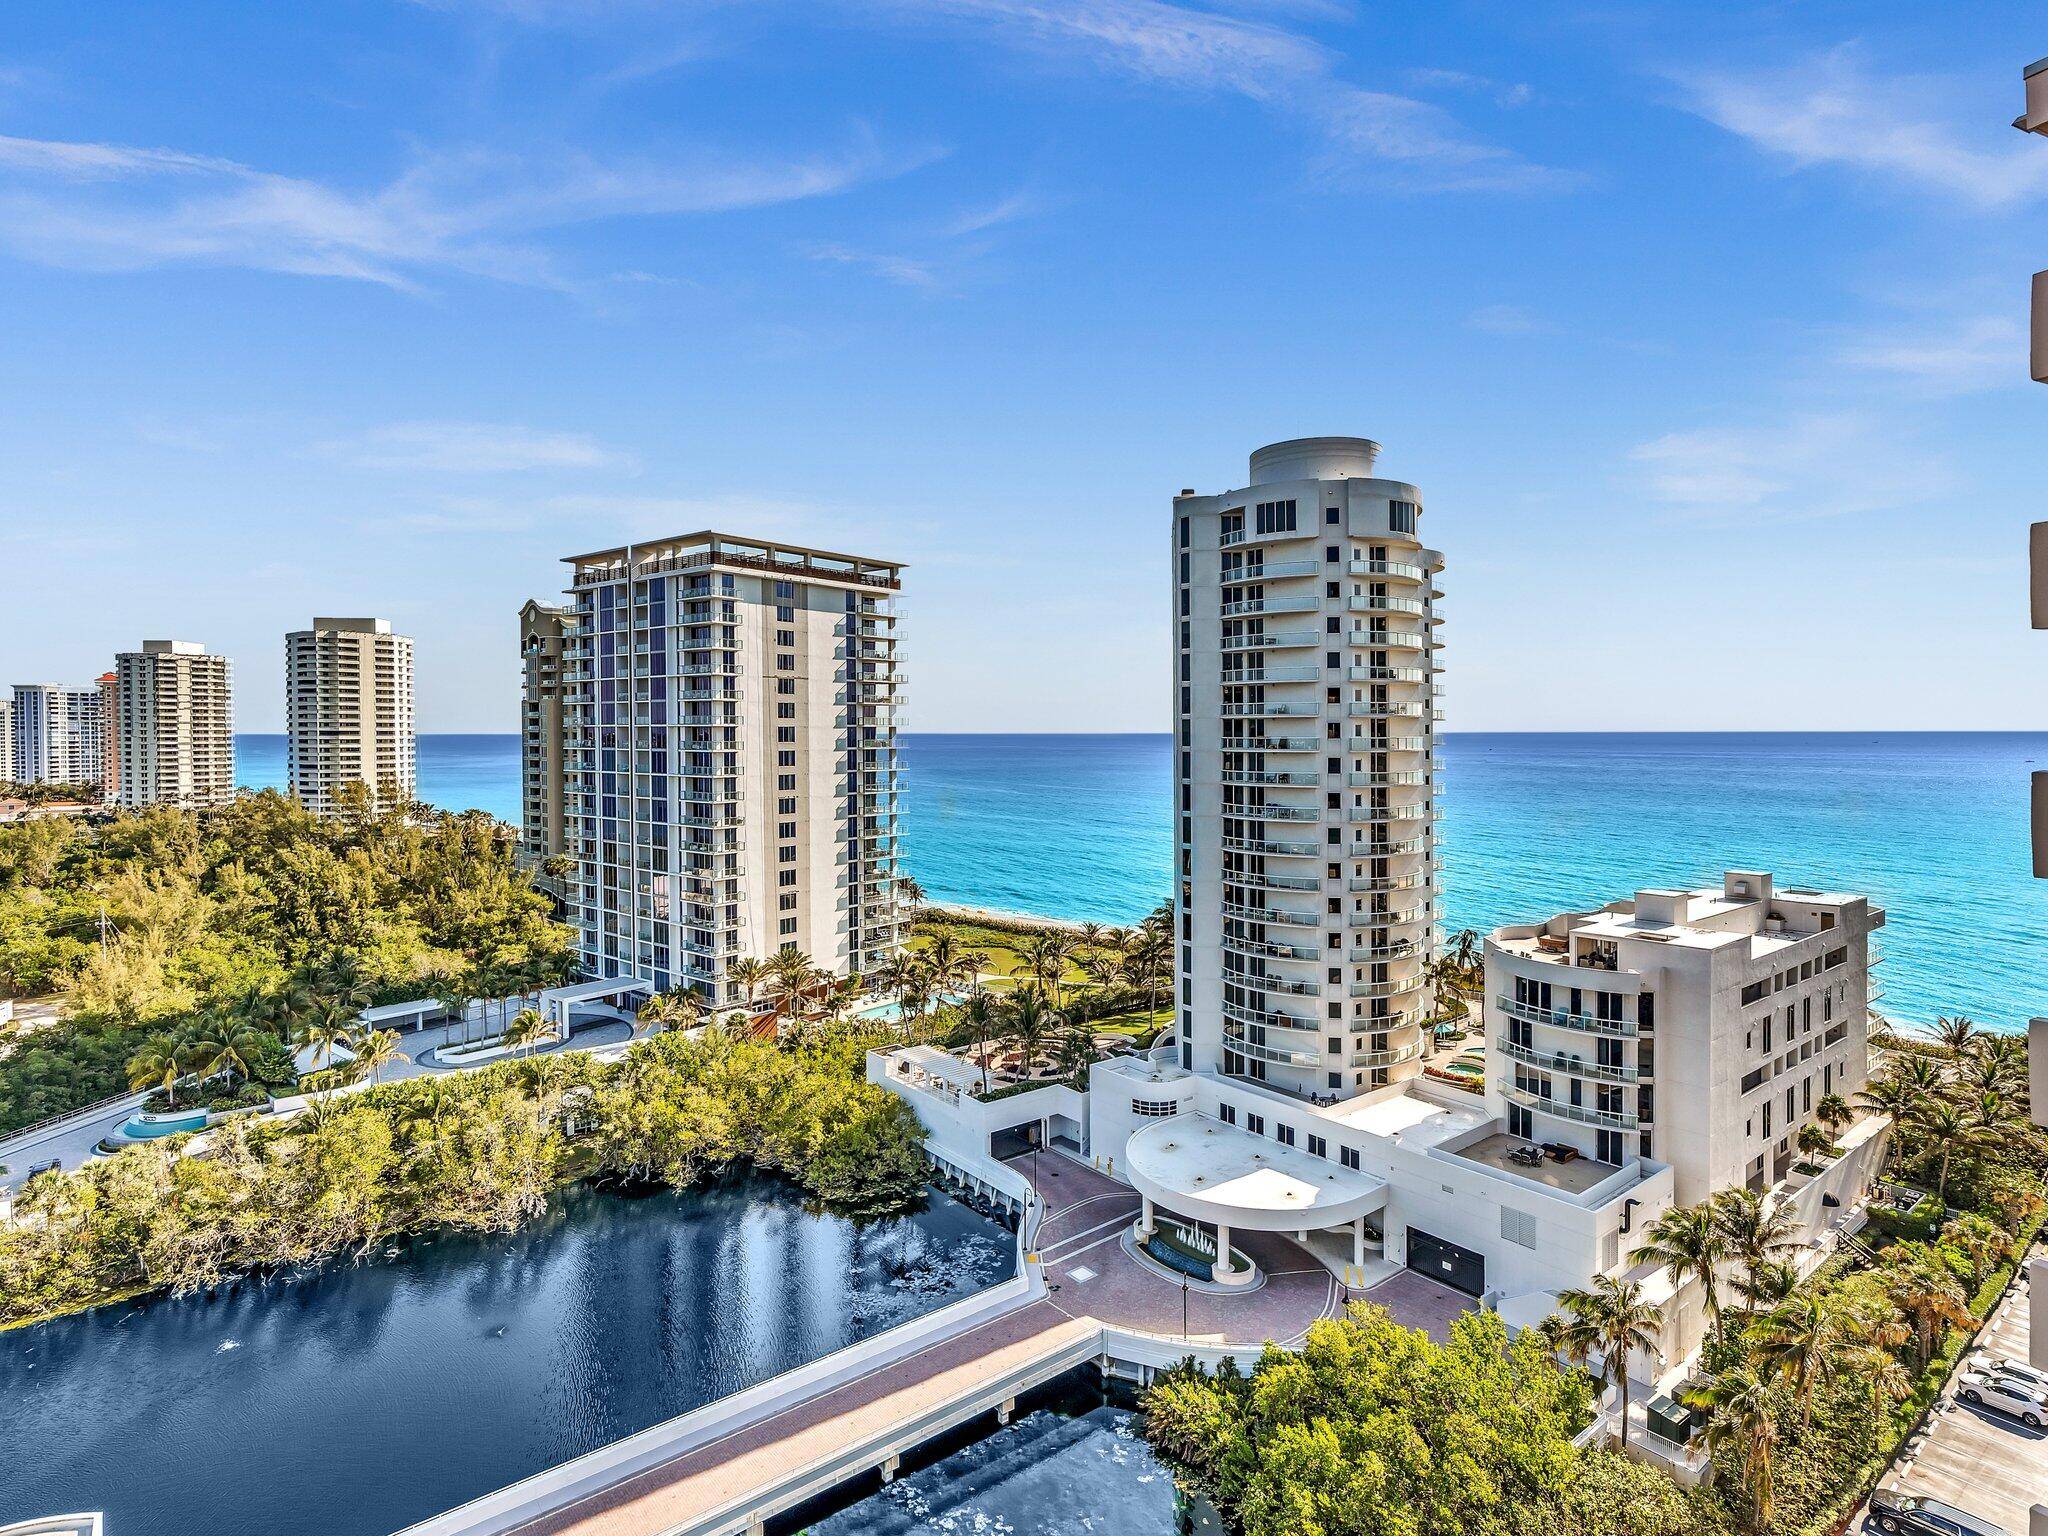 Singer Island Gorgeous High Floor 2 Bed 2 Bath Apartment with Panoramic Views of the Intercoastal Ocean.